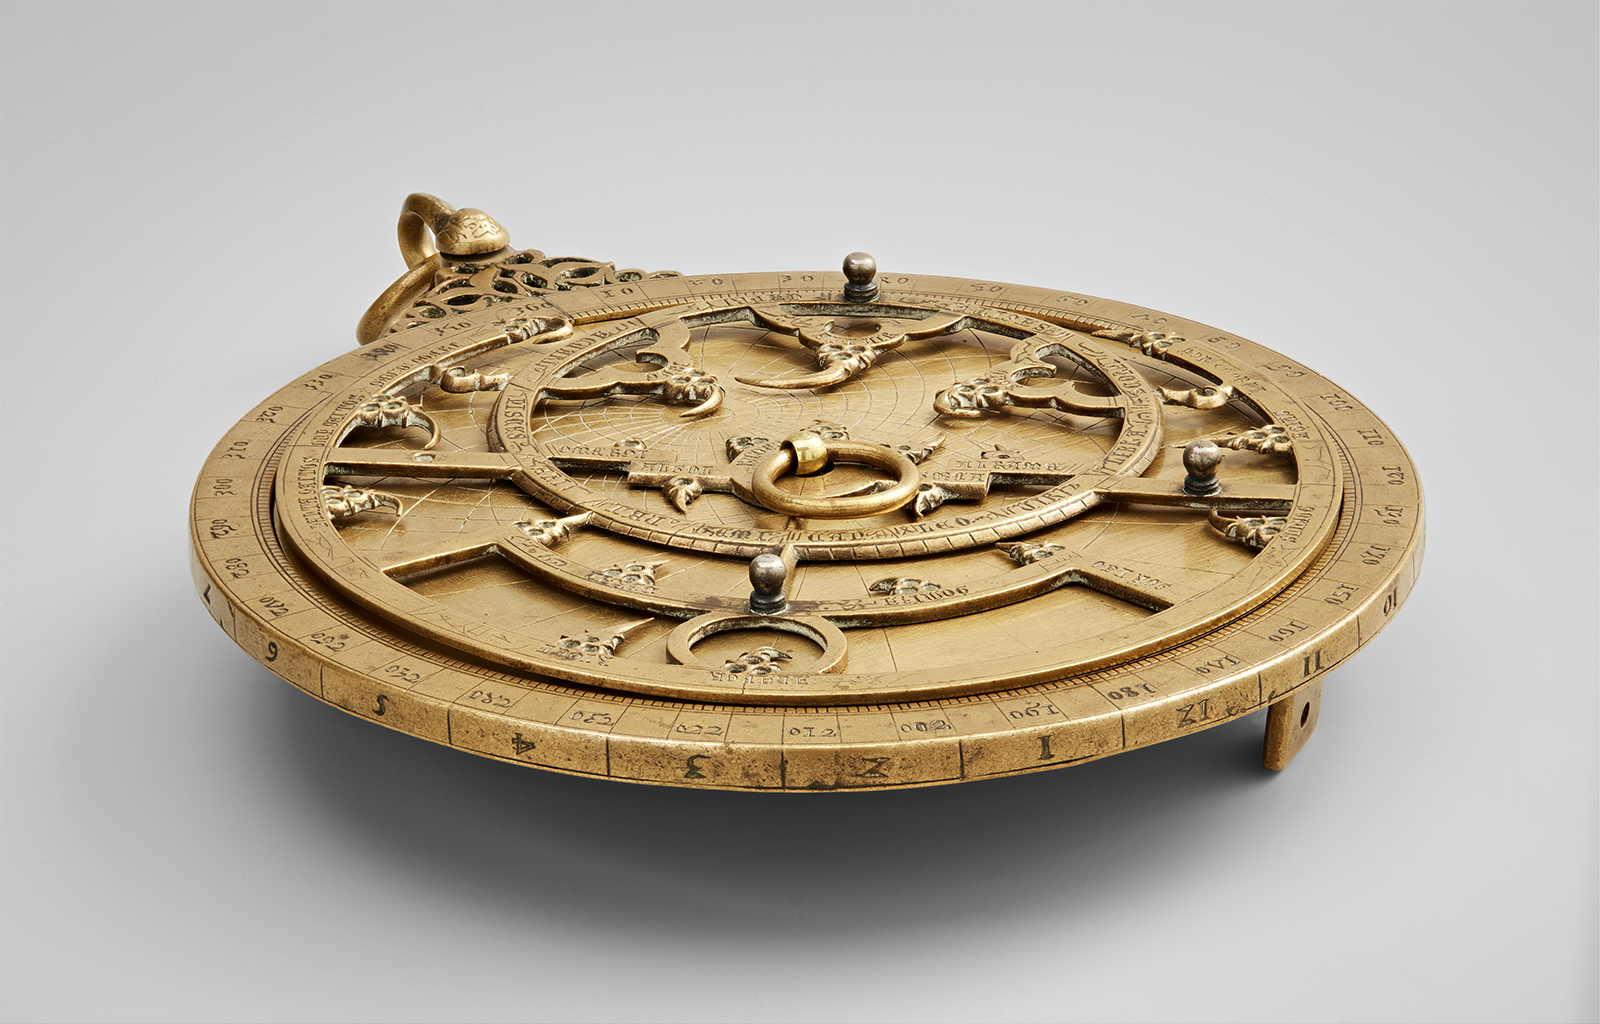 : Made primarily of bronze and inlaid with silver, this 14th-century astrolabe in the Museum’s Collection features inscriptions in three languages: Arabic, Hebrew, and Latin.